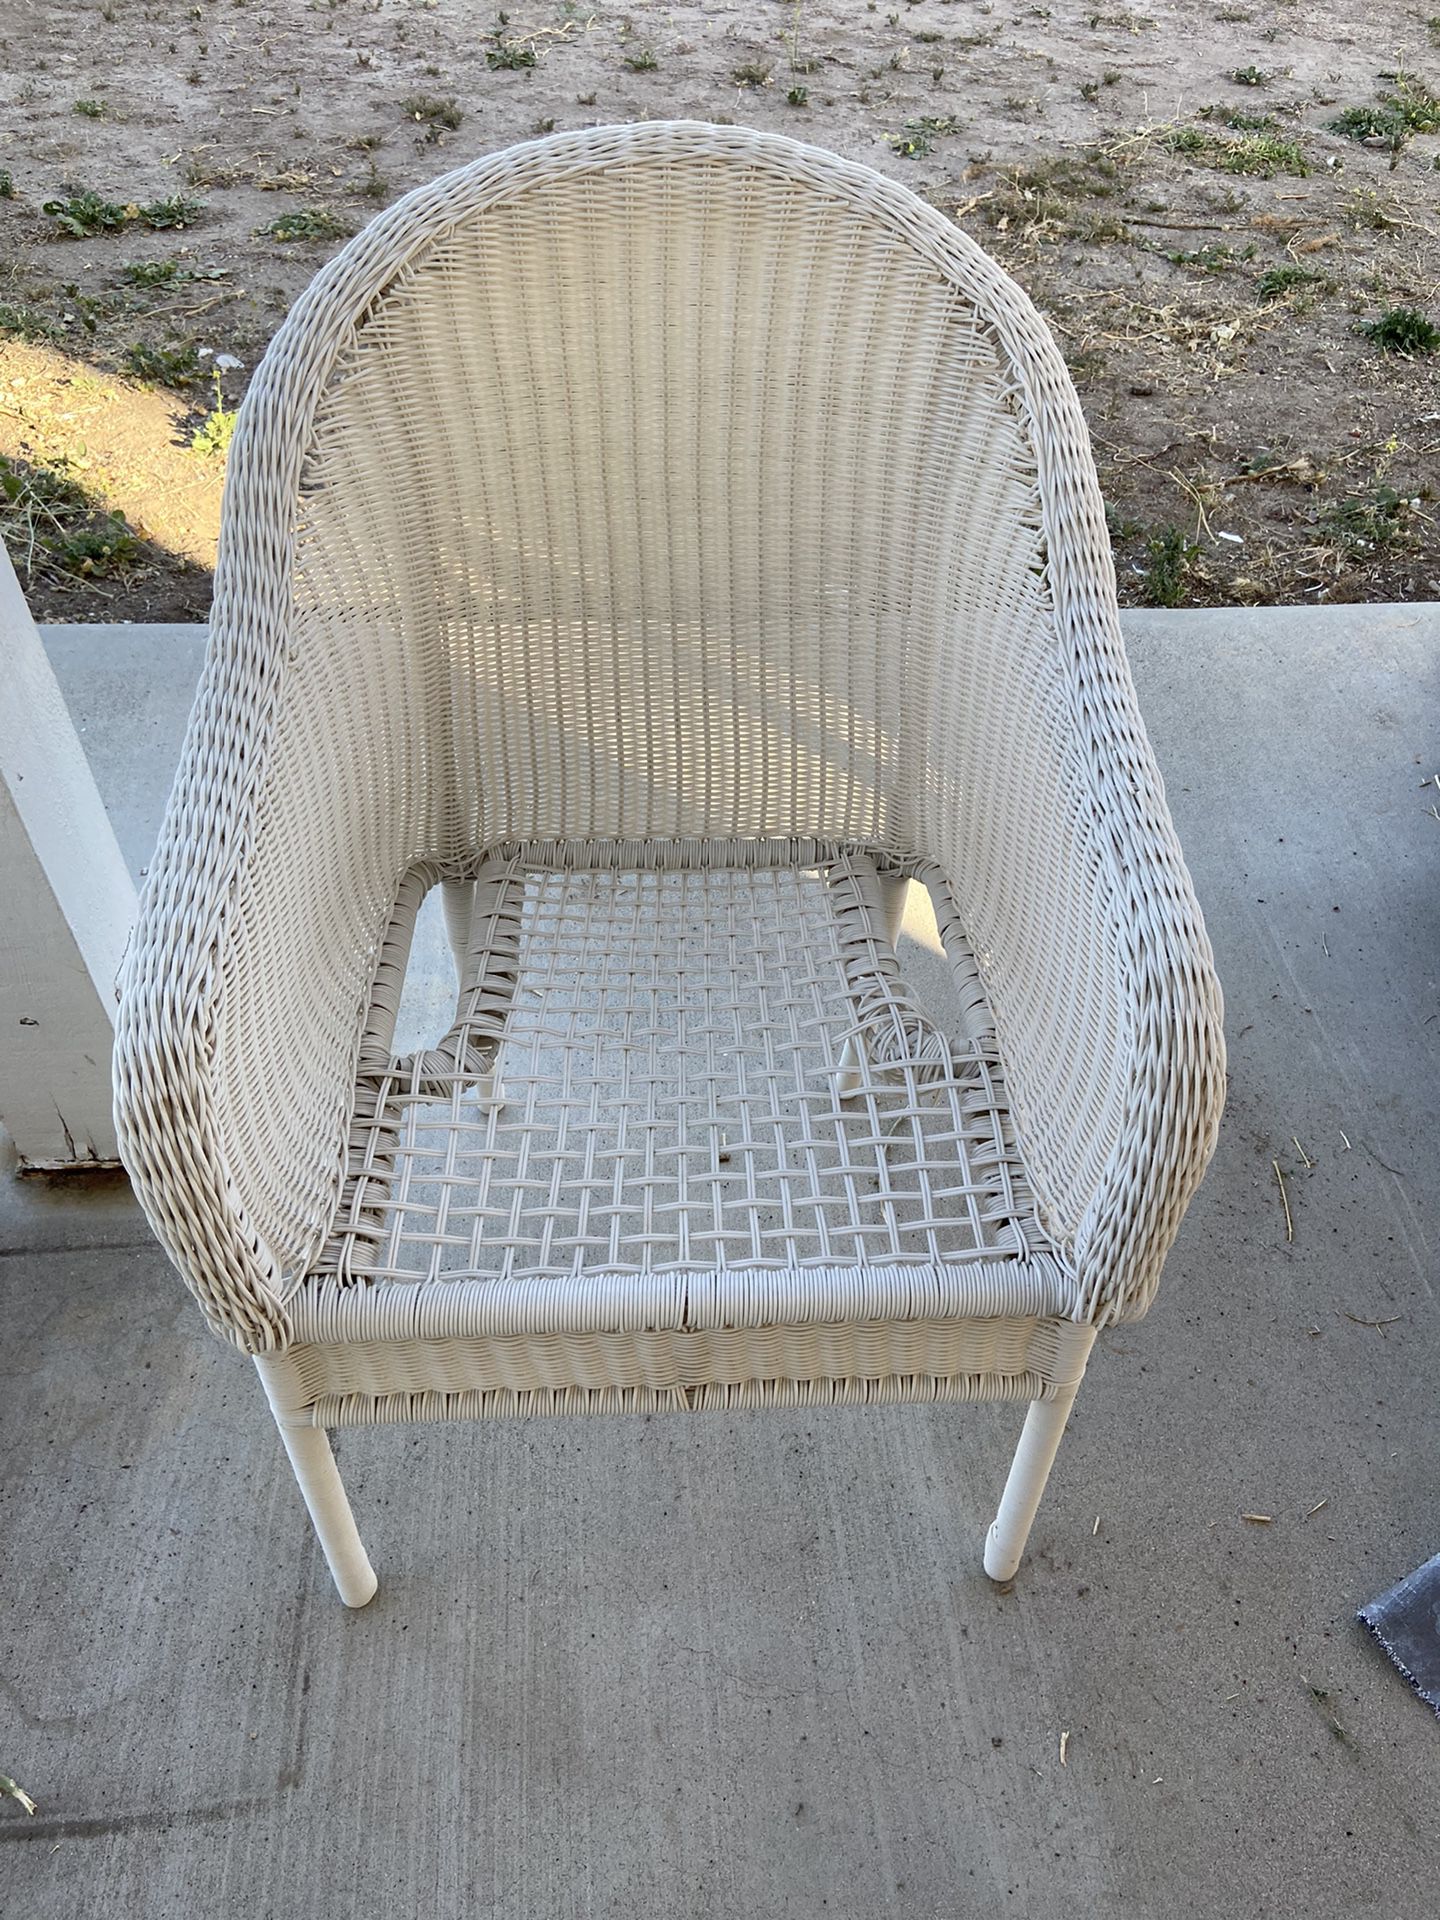 Outdoor Patio Chairs Set of 4 $10 Each